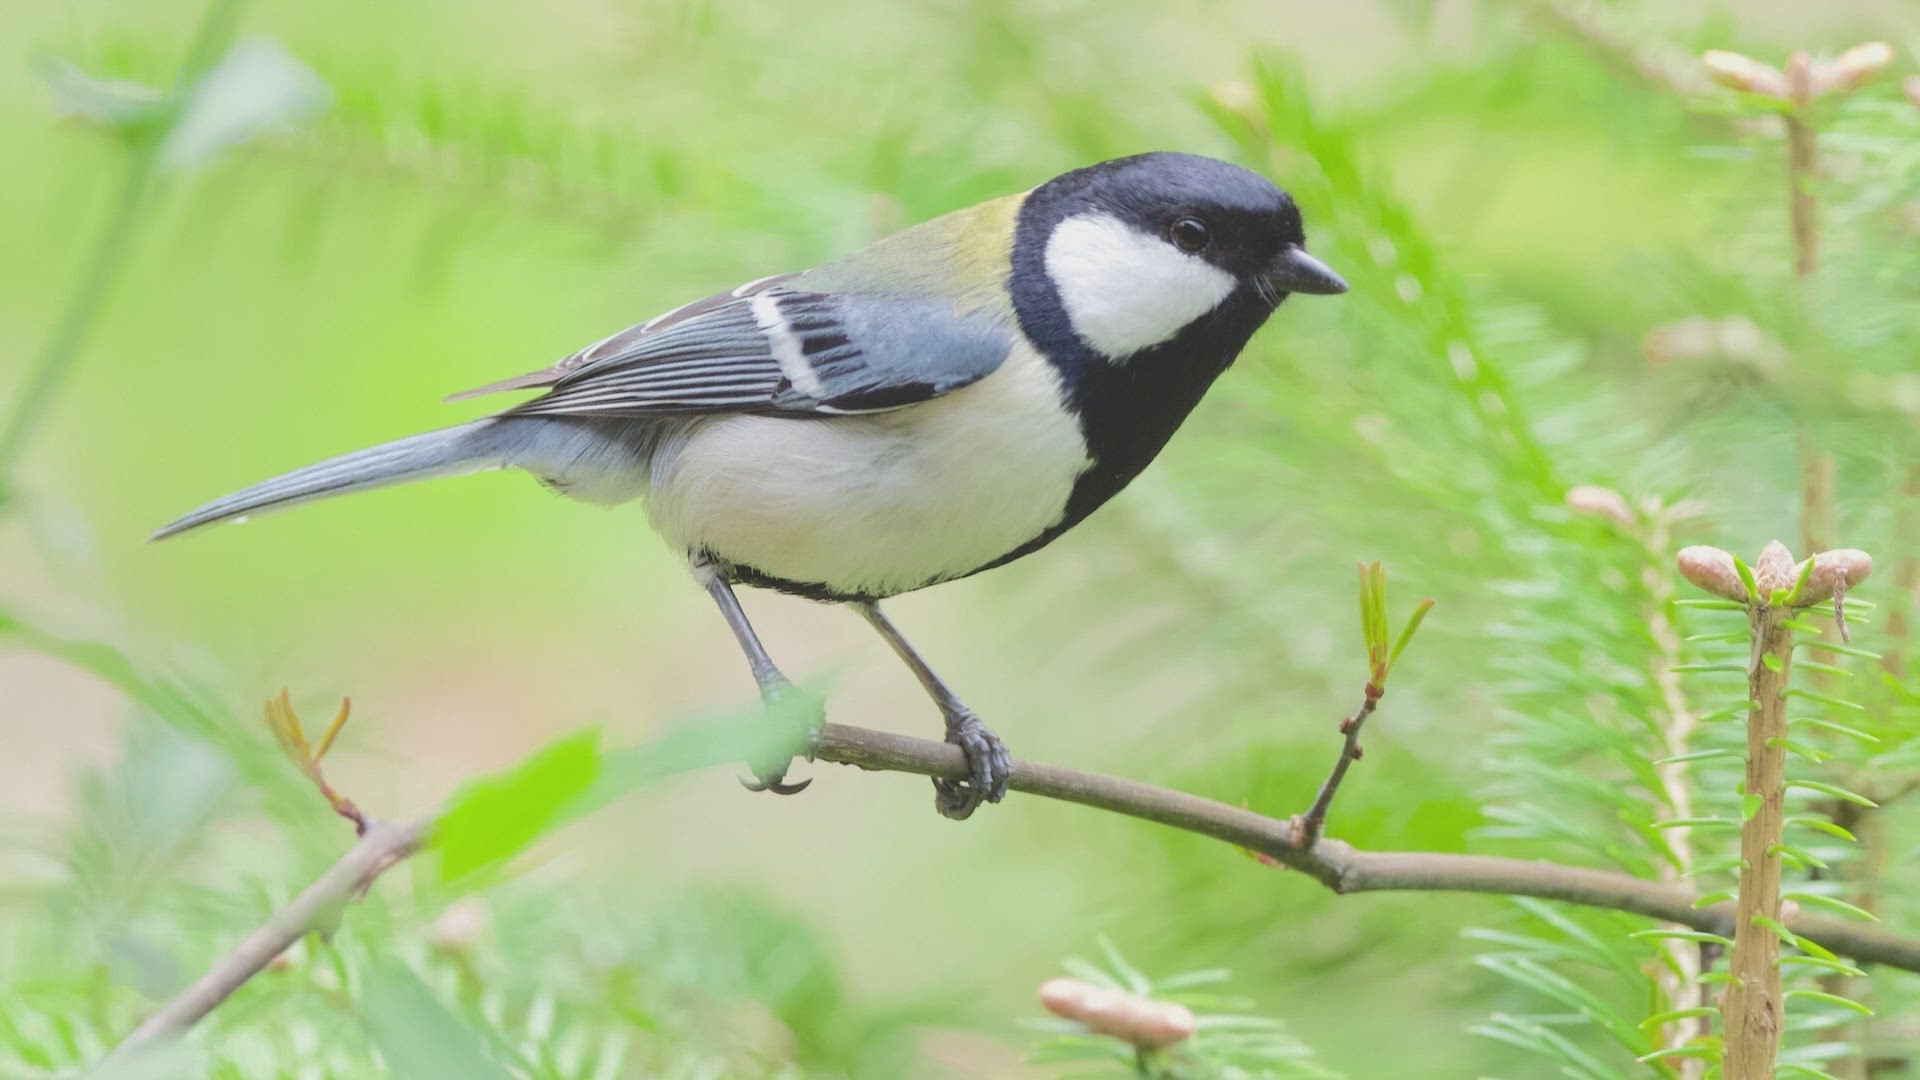 Researchers at the University of Tokyo studied the Japanese tit, a cousin of the black-capped chickadee, and found they appear to have an "after you" type gesture.